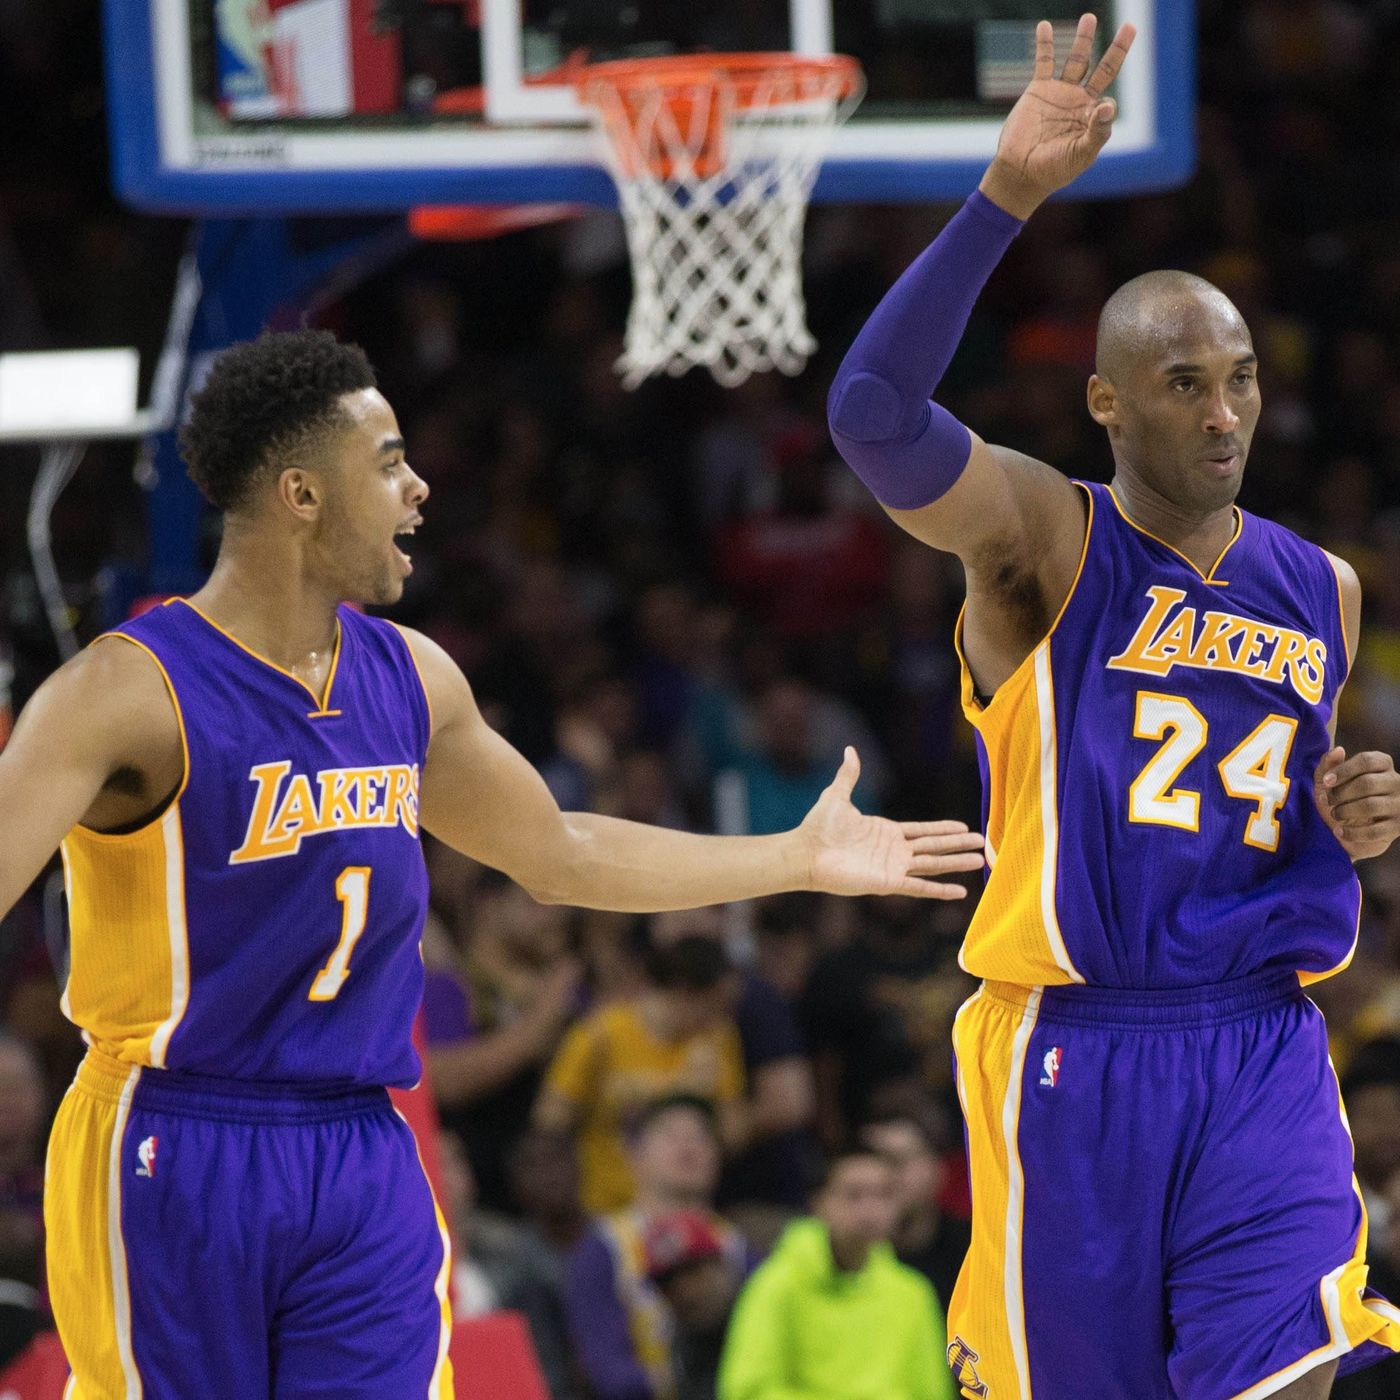 D'Angelo Russell's antics takes away from Kobe's farewell tour